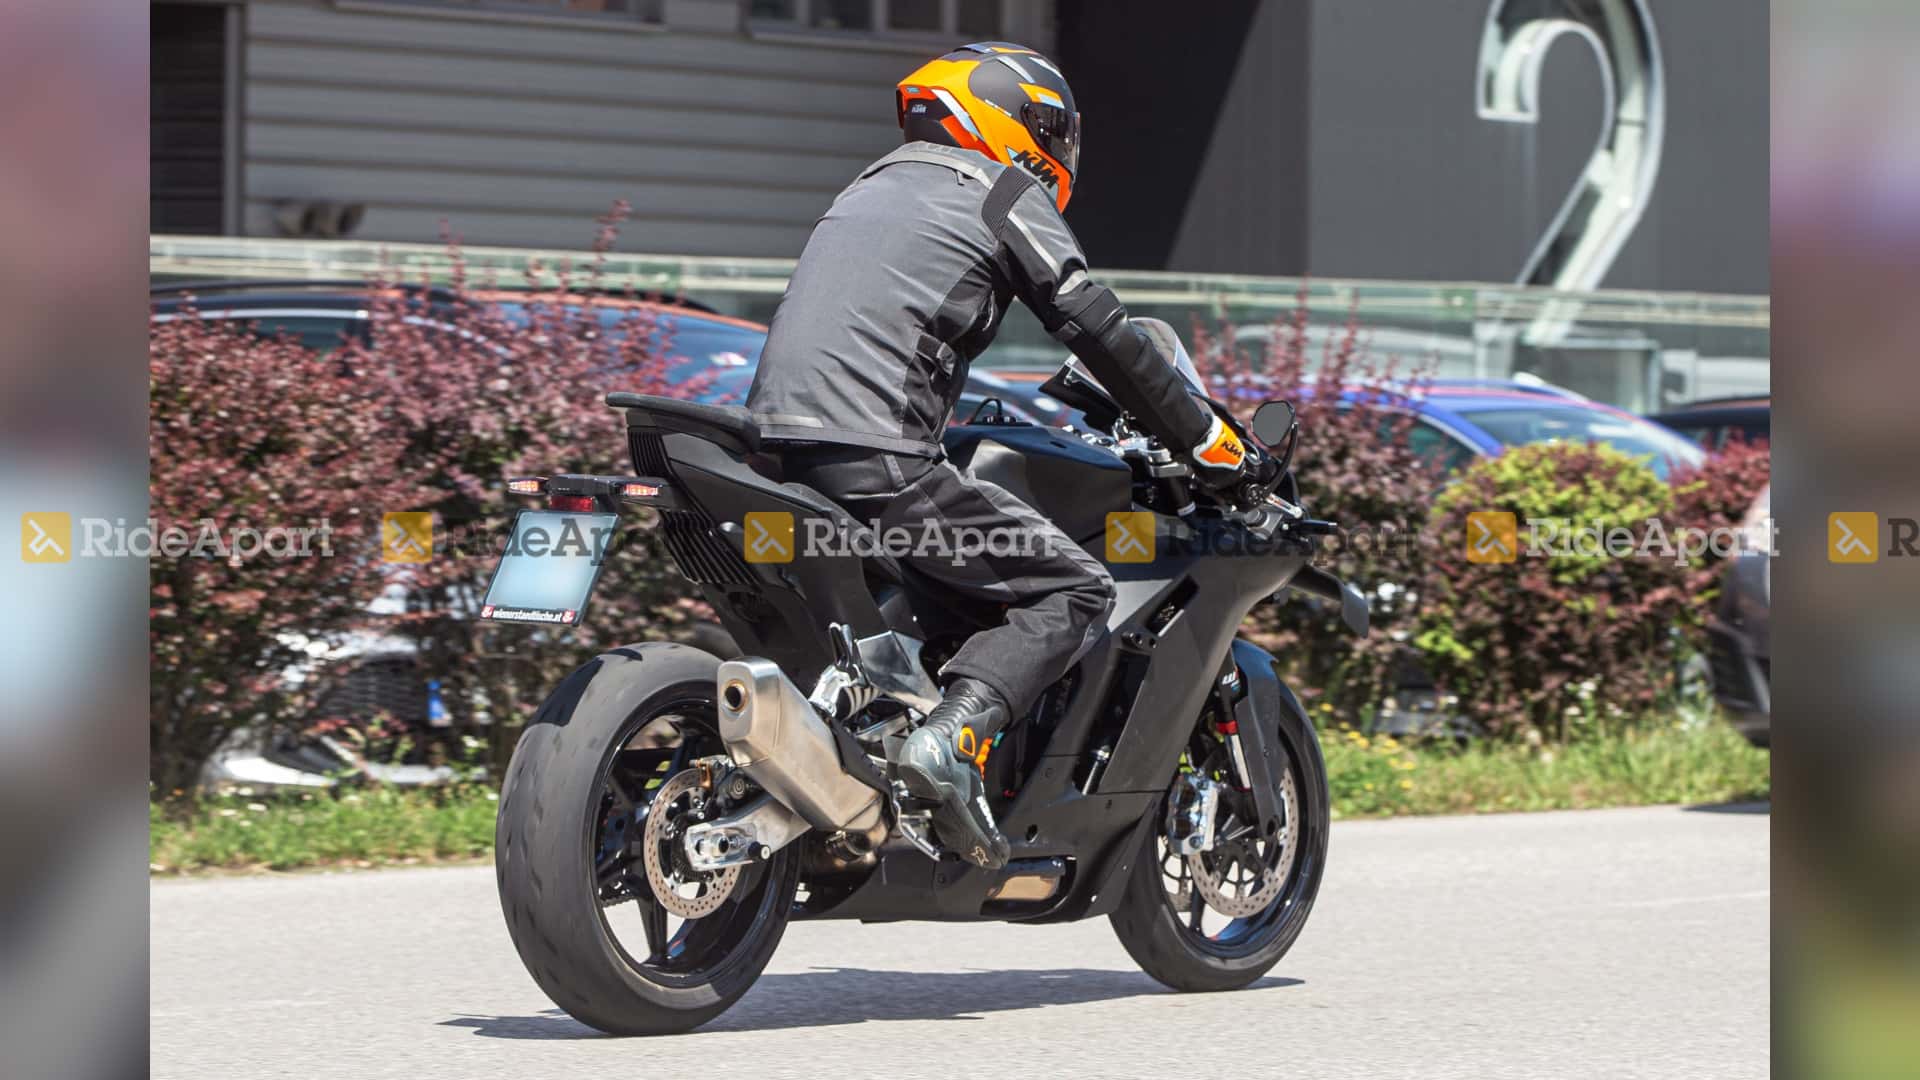 KTM RC 990 Sports Bike Spotted - The Faired Version of Duke 990 - close-up